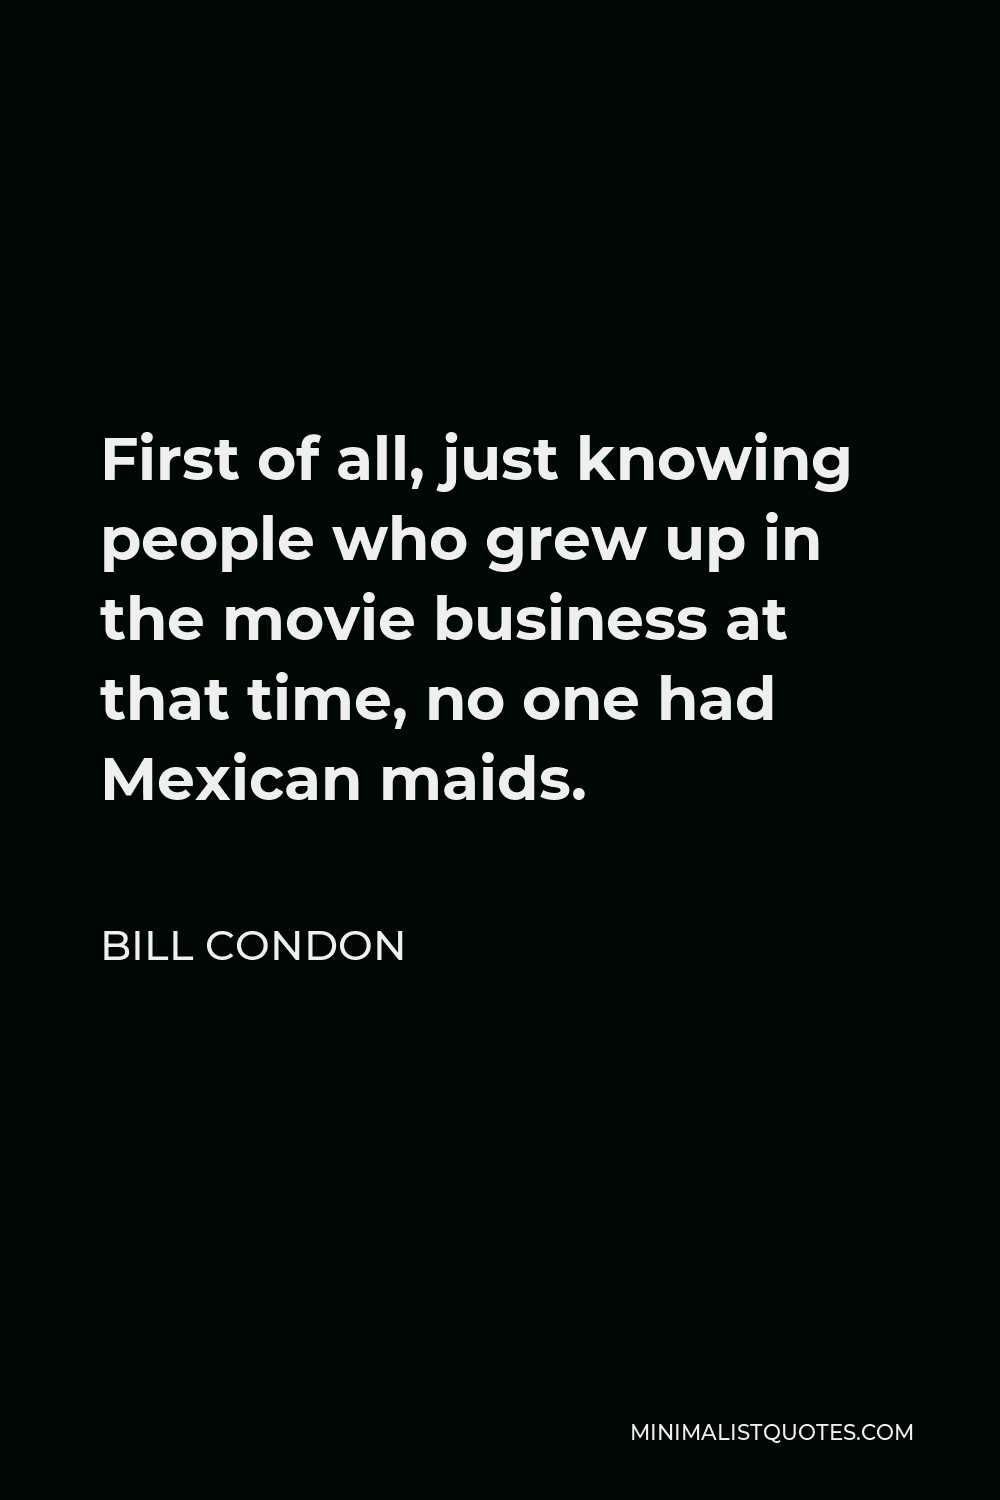 Bill Condon Quote - First of all, just knowing people who grew up in the movie business at that time, no one had Mexican maids.